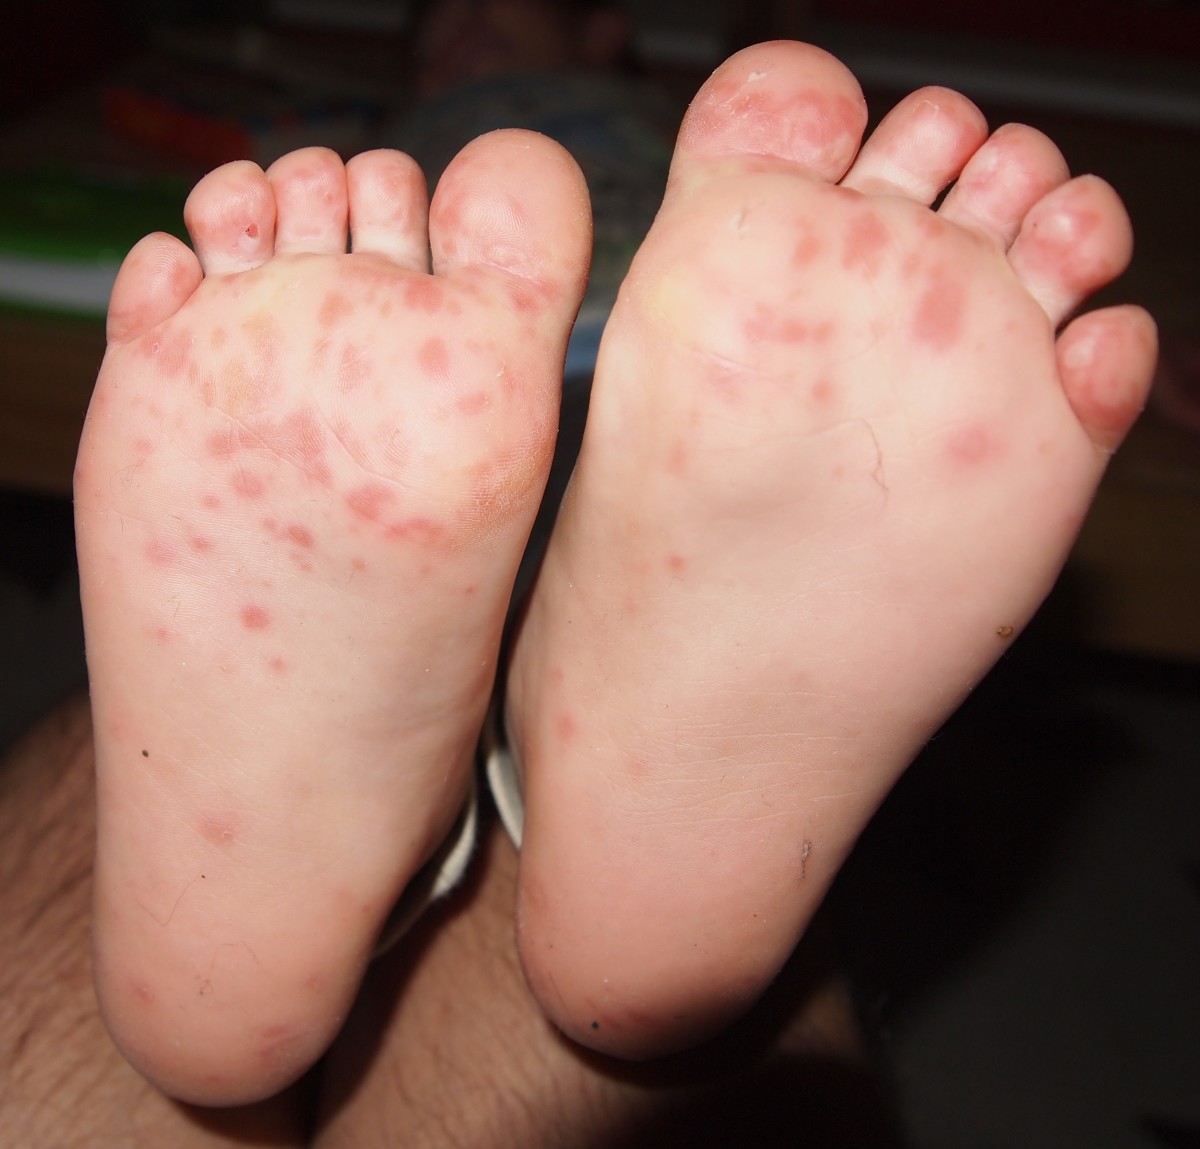 Hand, foot, and mouth disease can cause blisters on the feet, causing some discomfort when walking